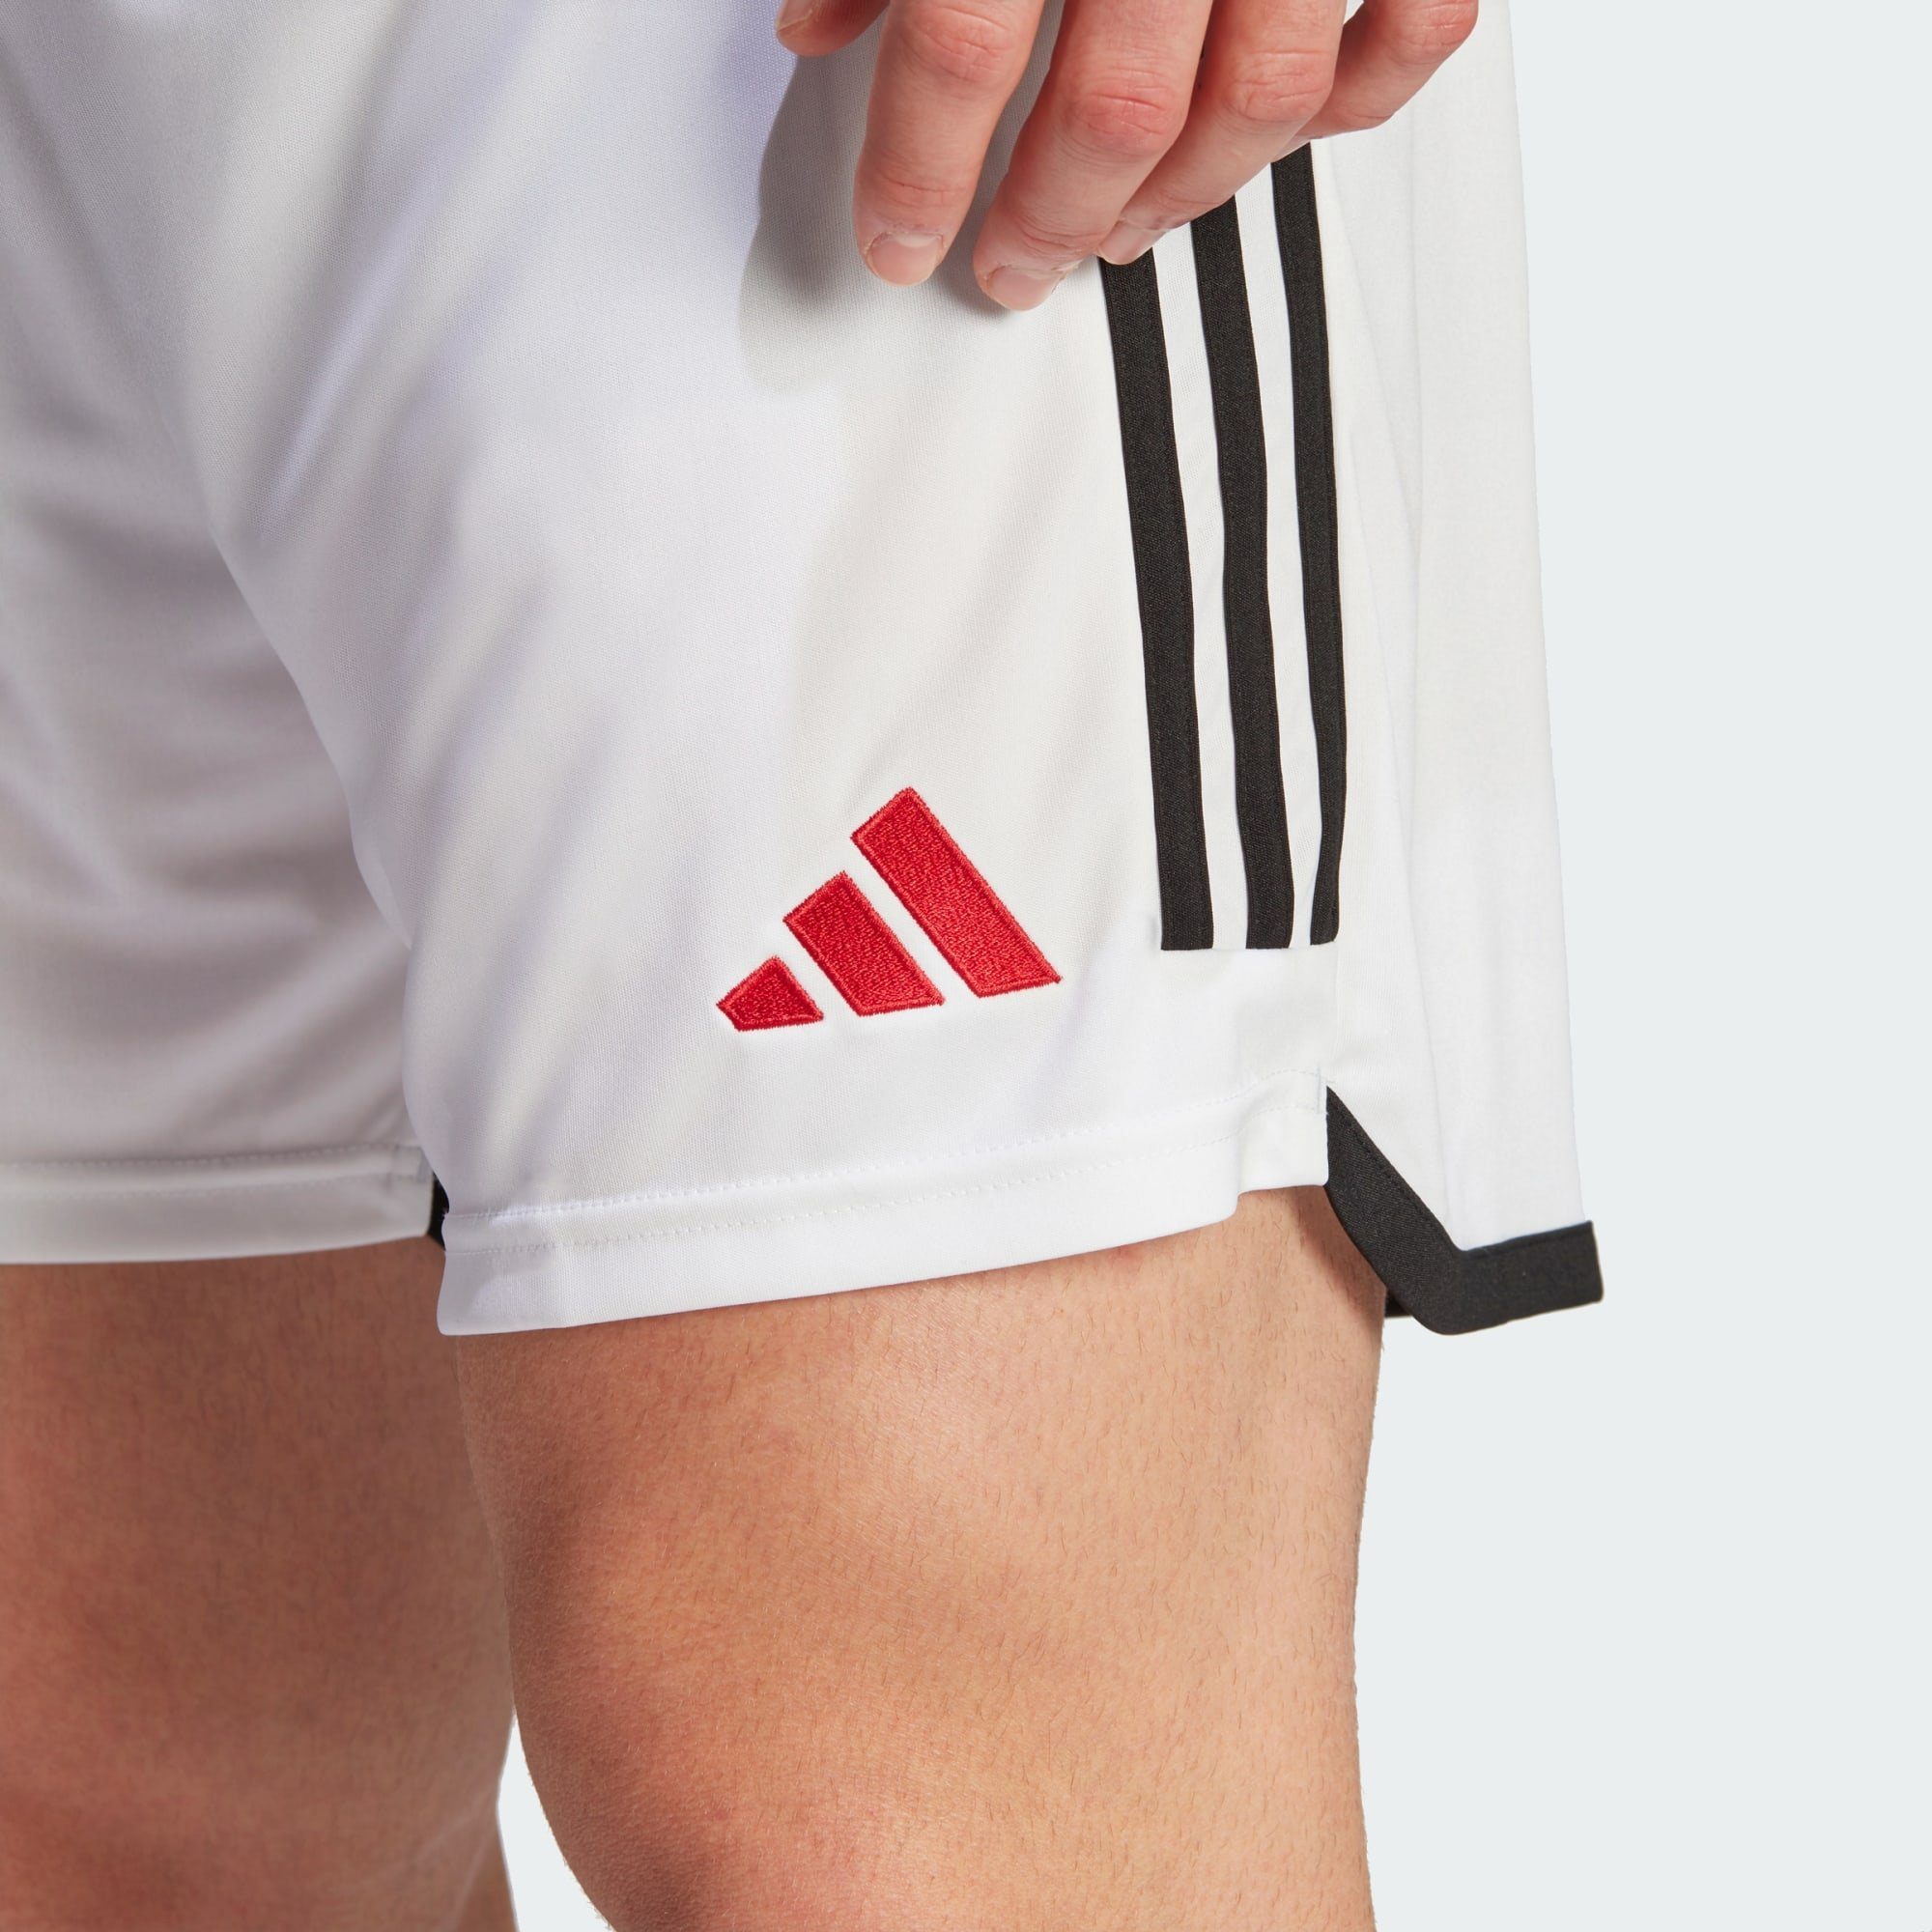 adidas UNITED weiss HEIMSHORTS Funktionsshorts MANCHESTER Performance 23/24